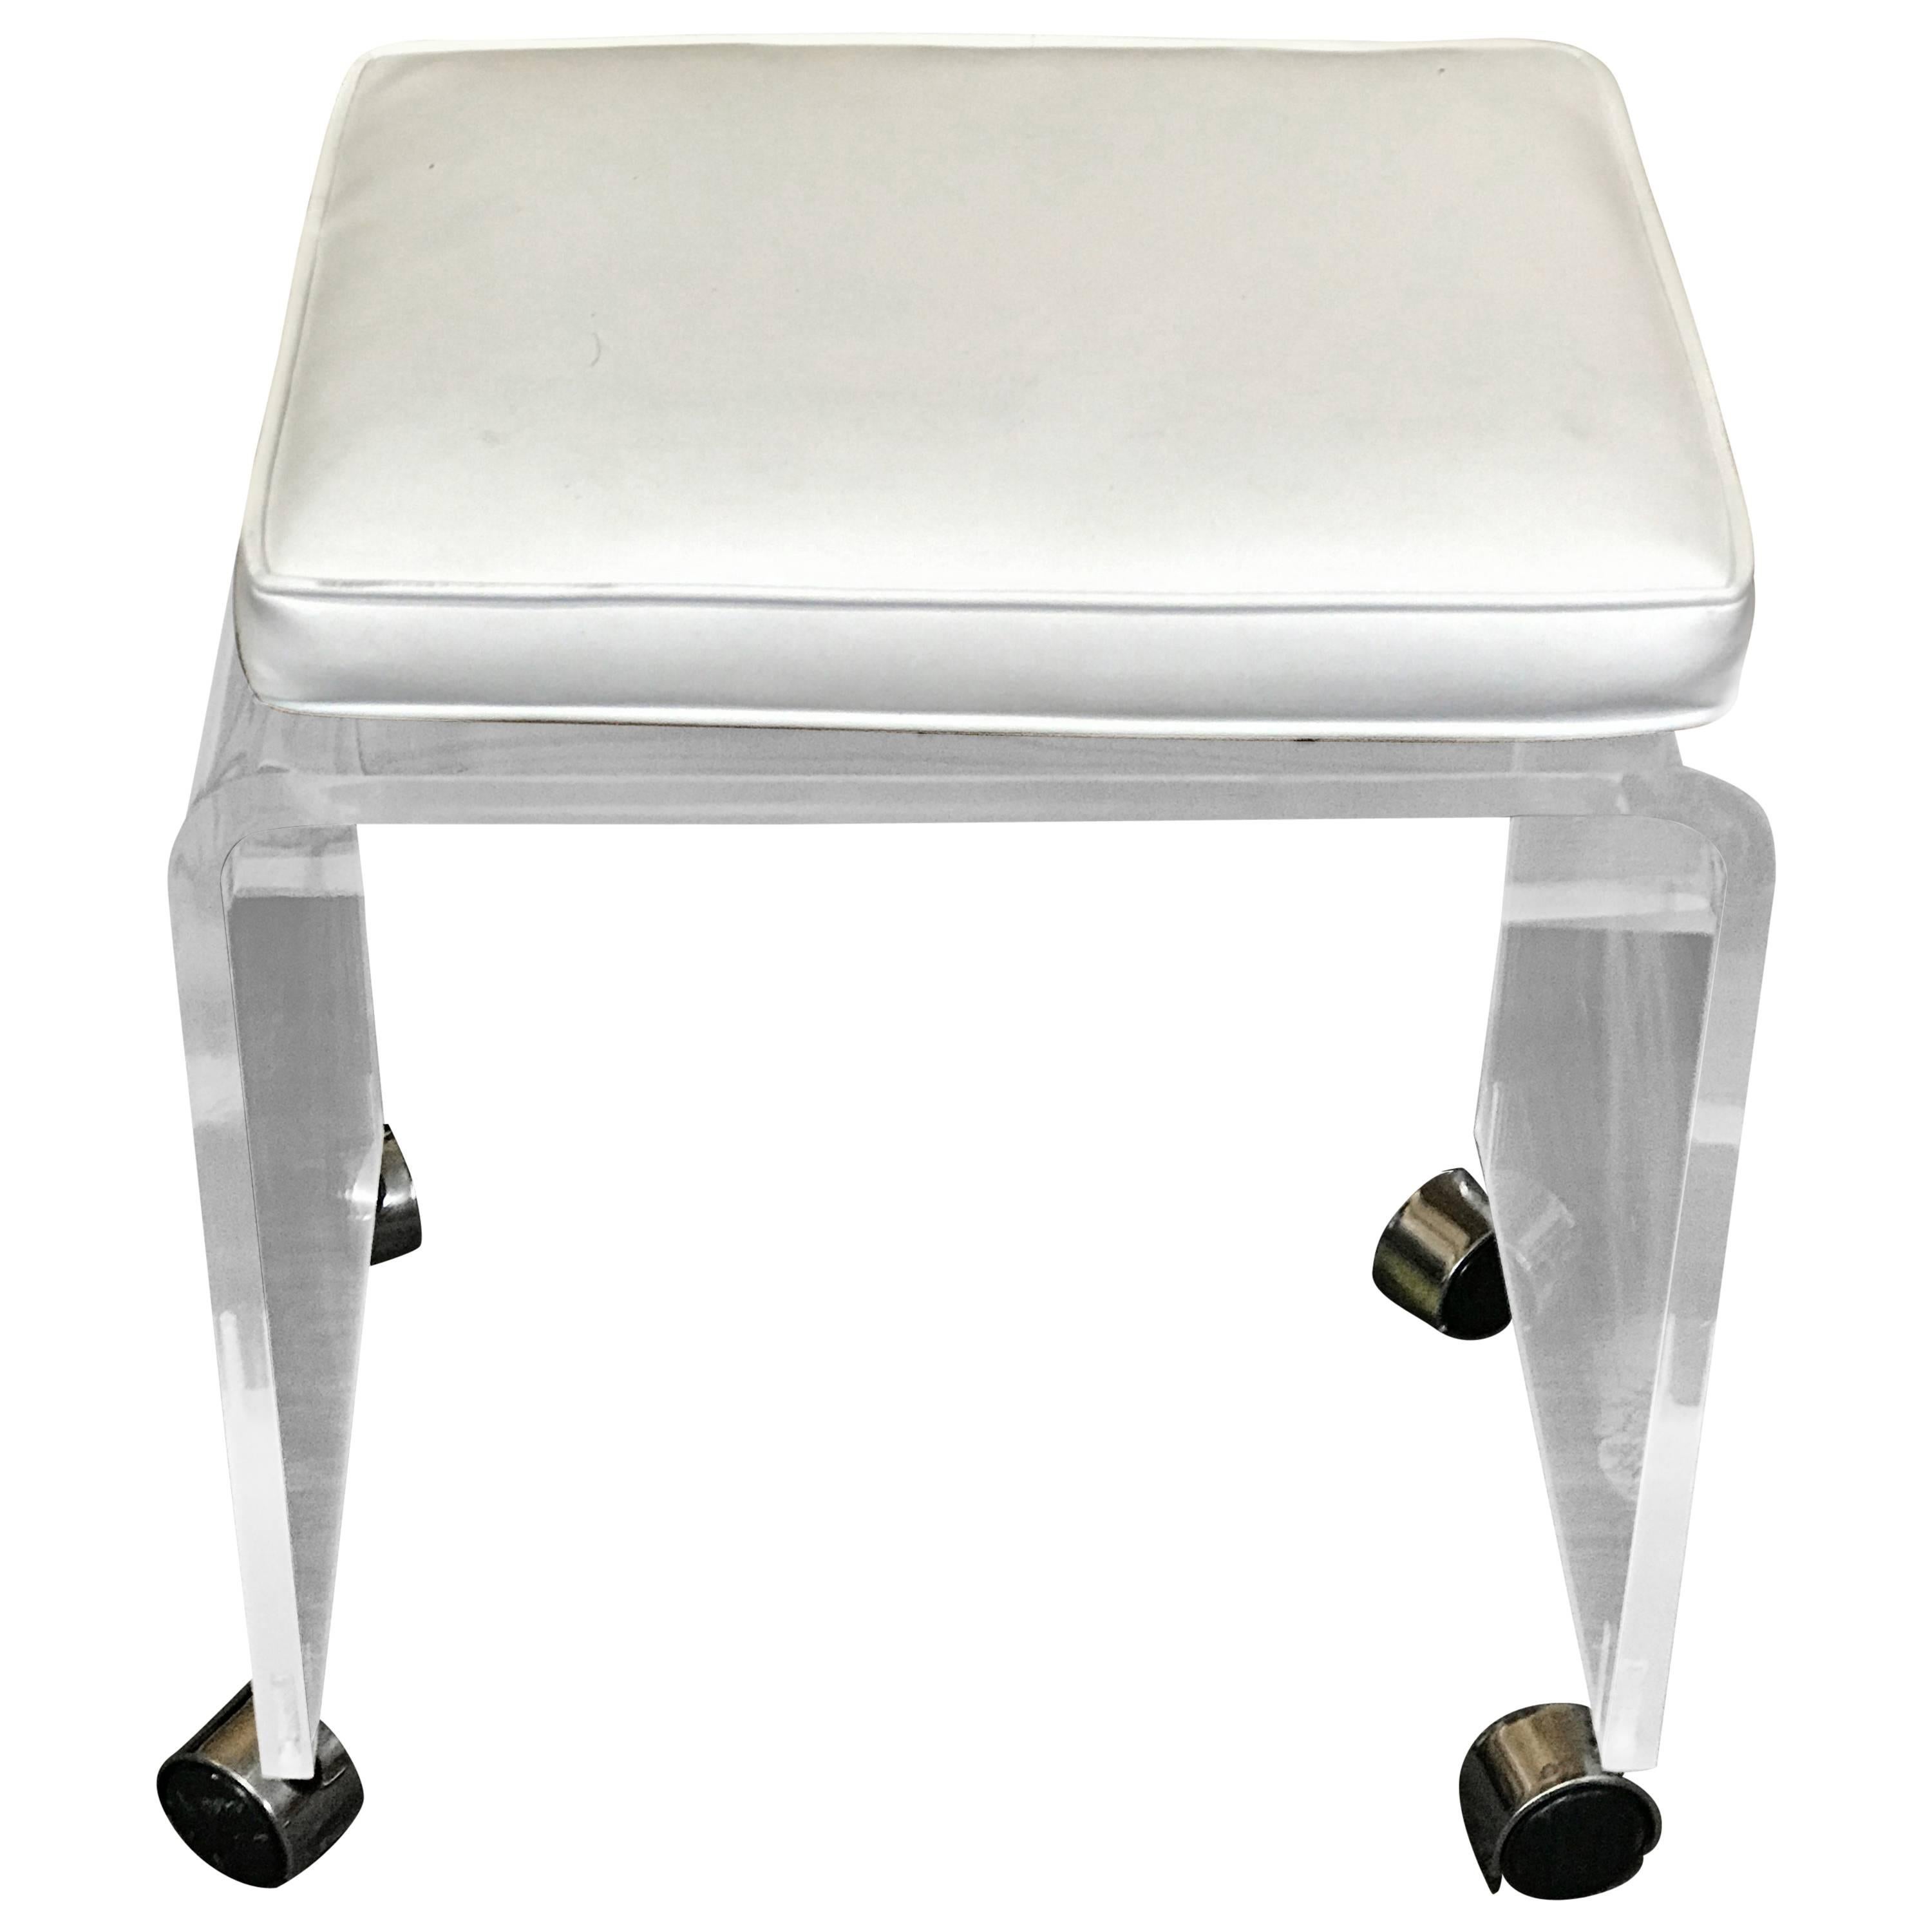 Lucite bench or stool with white Naugahyde cushion raised on chrome casters. The removable cushions measures 17" x 12"x 2" high. The bench as shown with the cushion has a seat height of 20" or 18" high without the cushion.